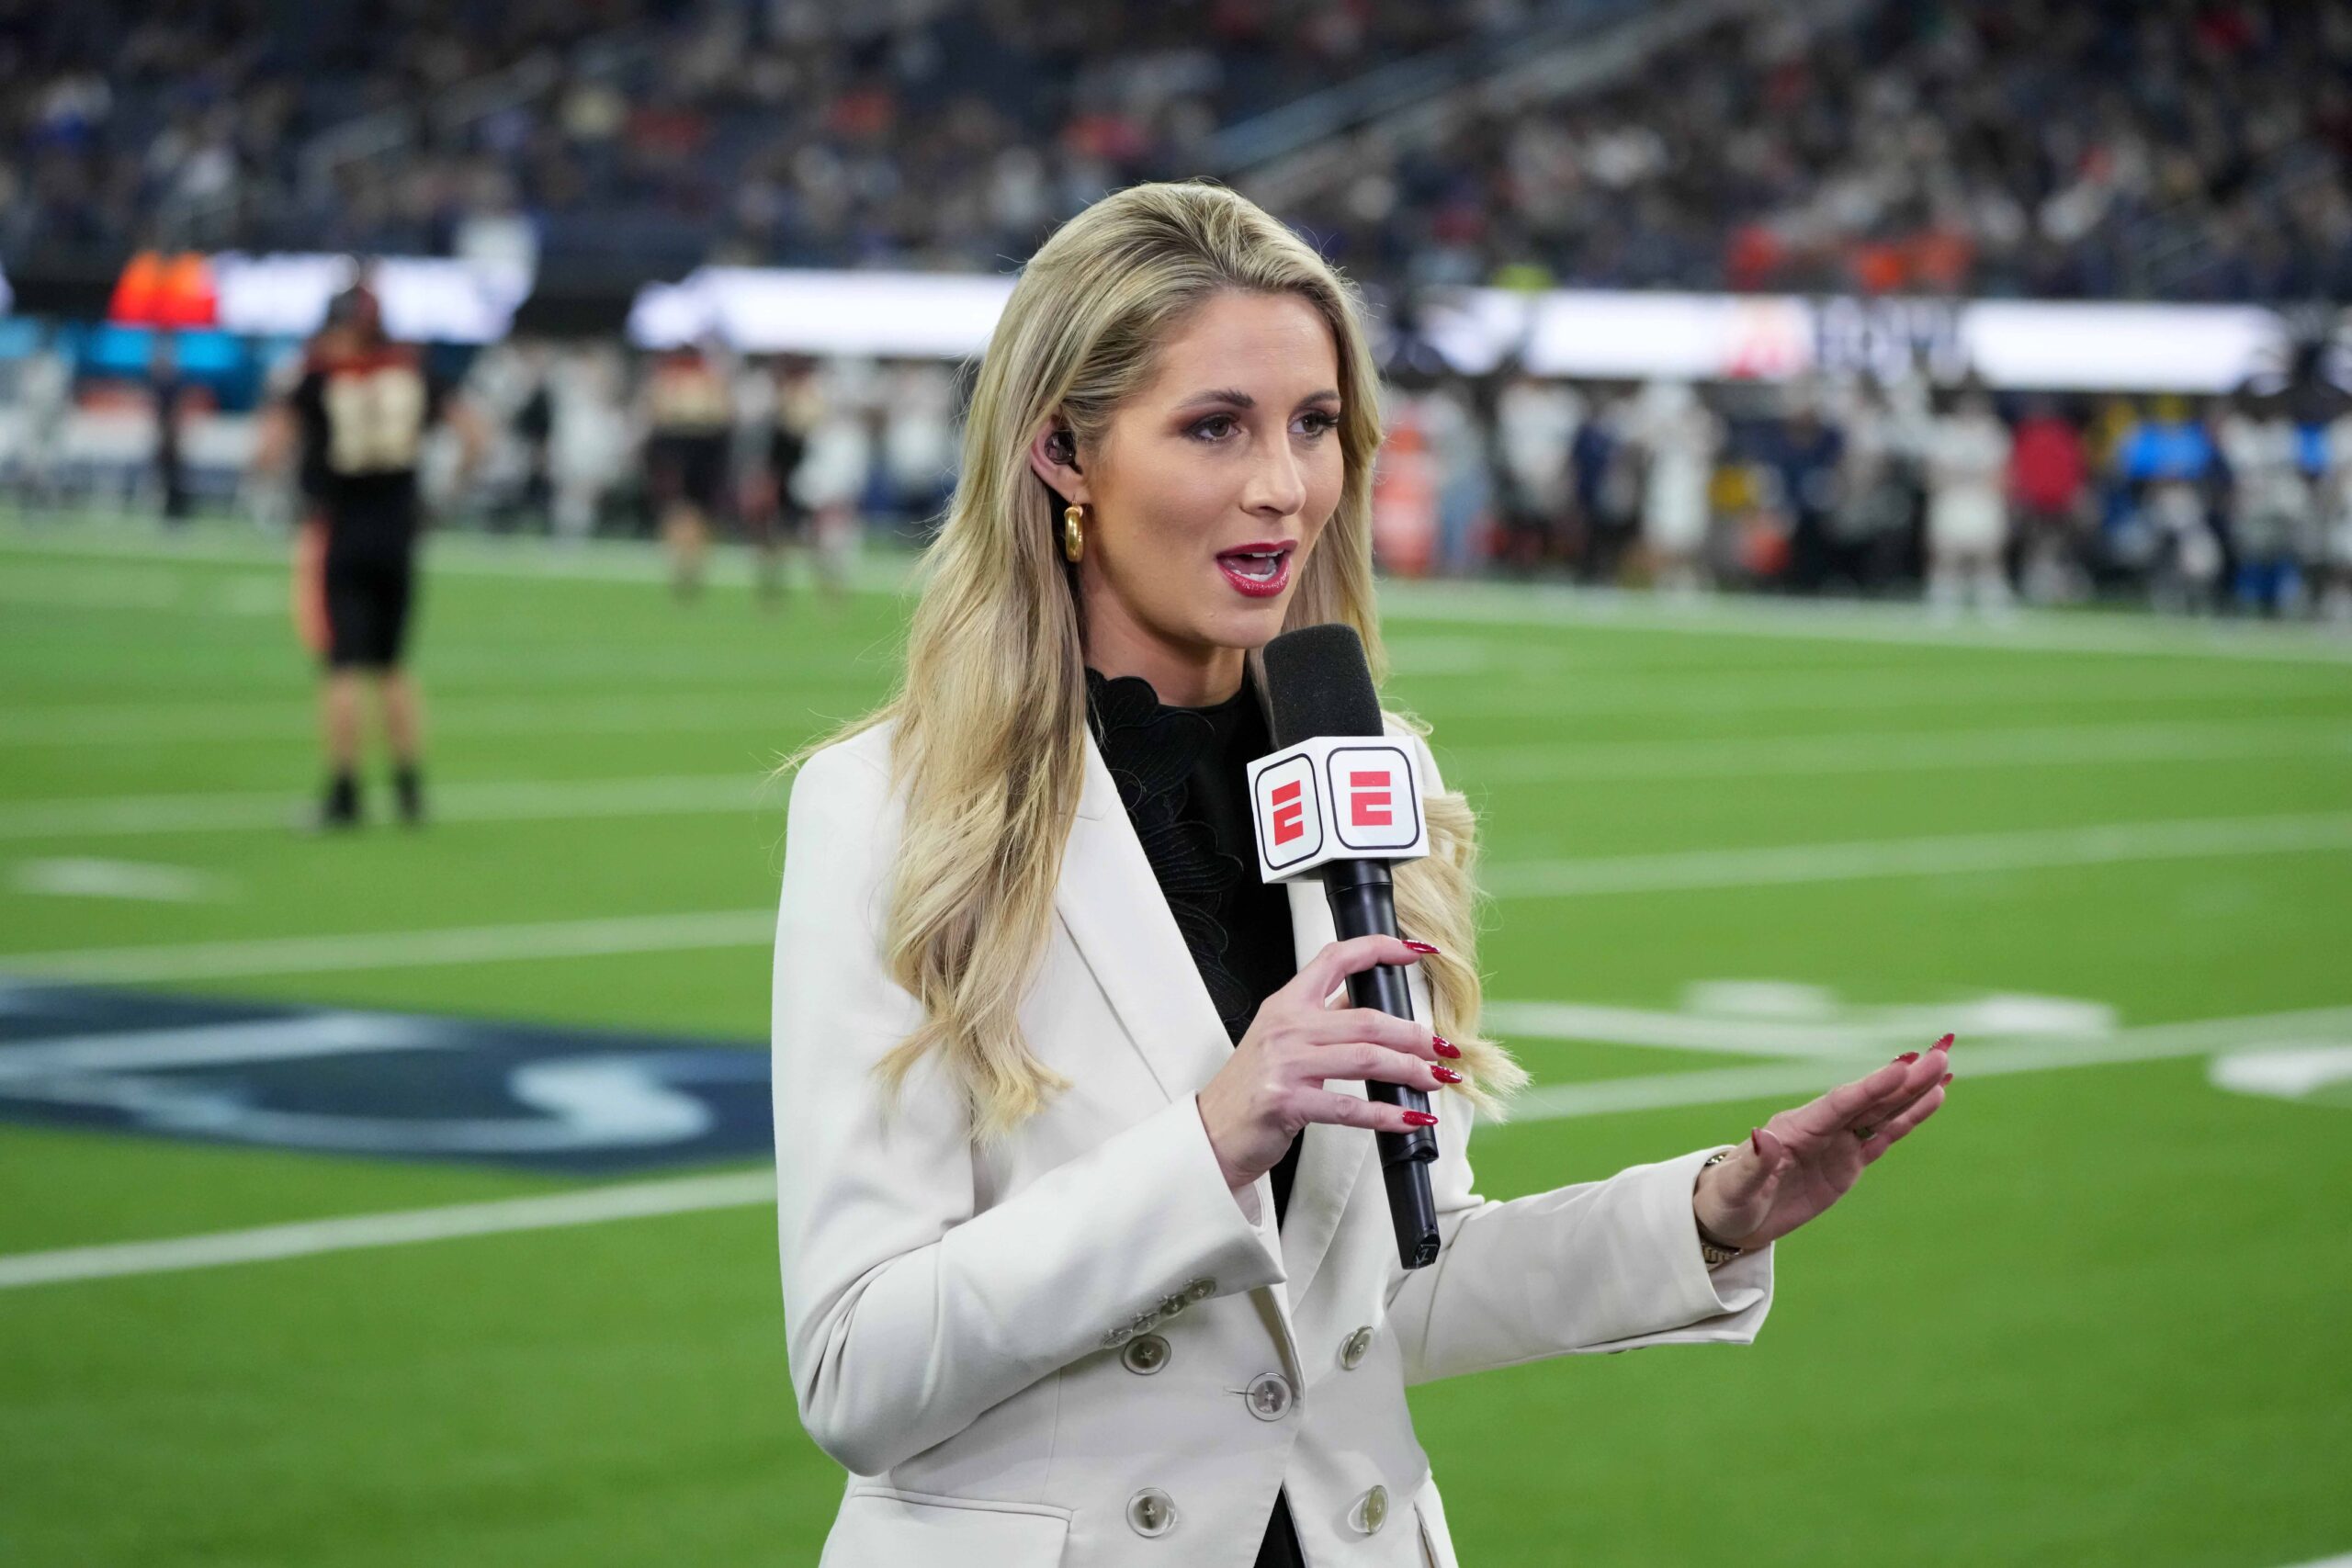 NFL Announcers Week 18: CBS, FOX, and ESPN Game Assignments This Week